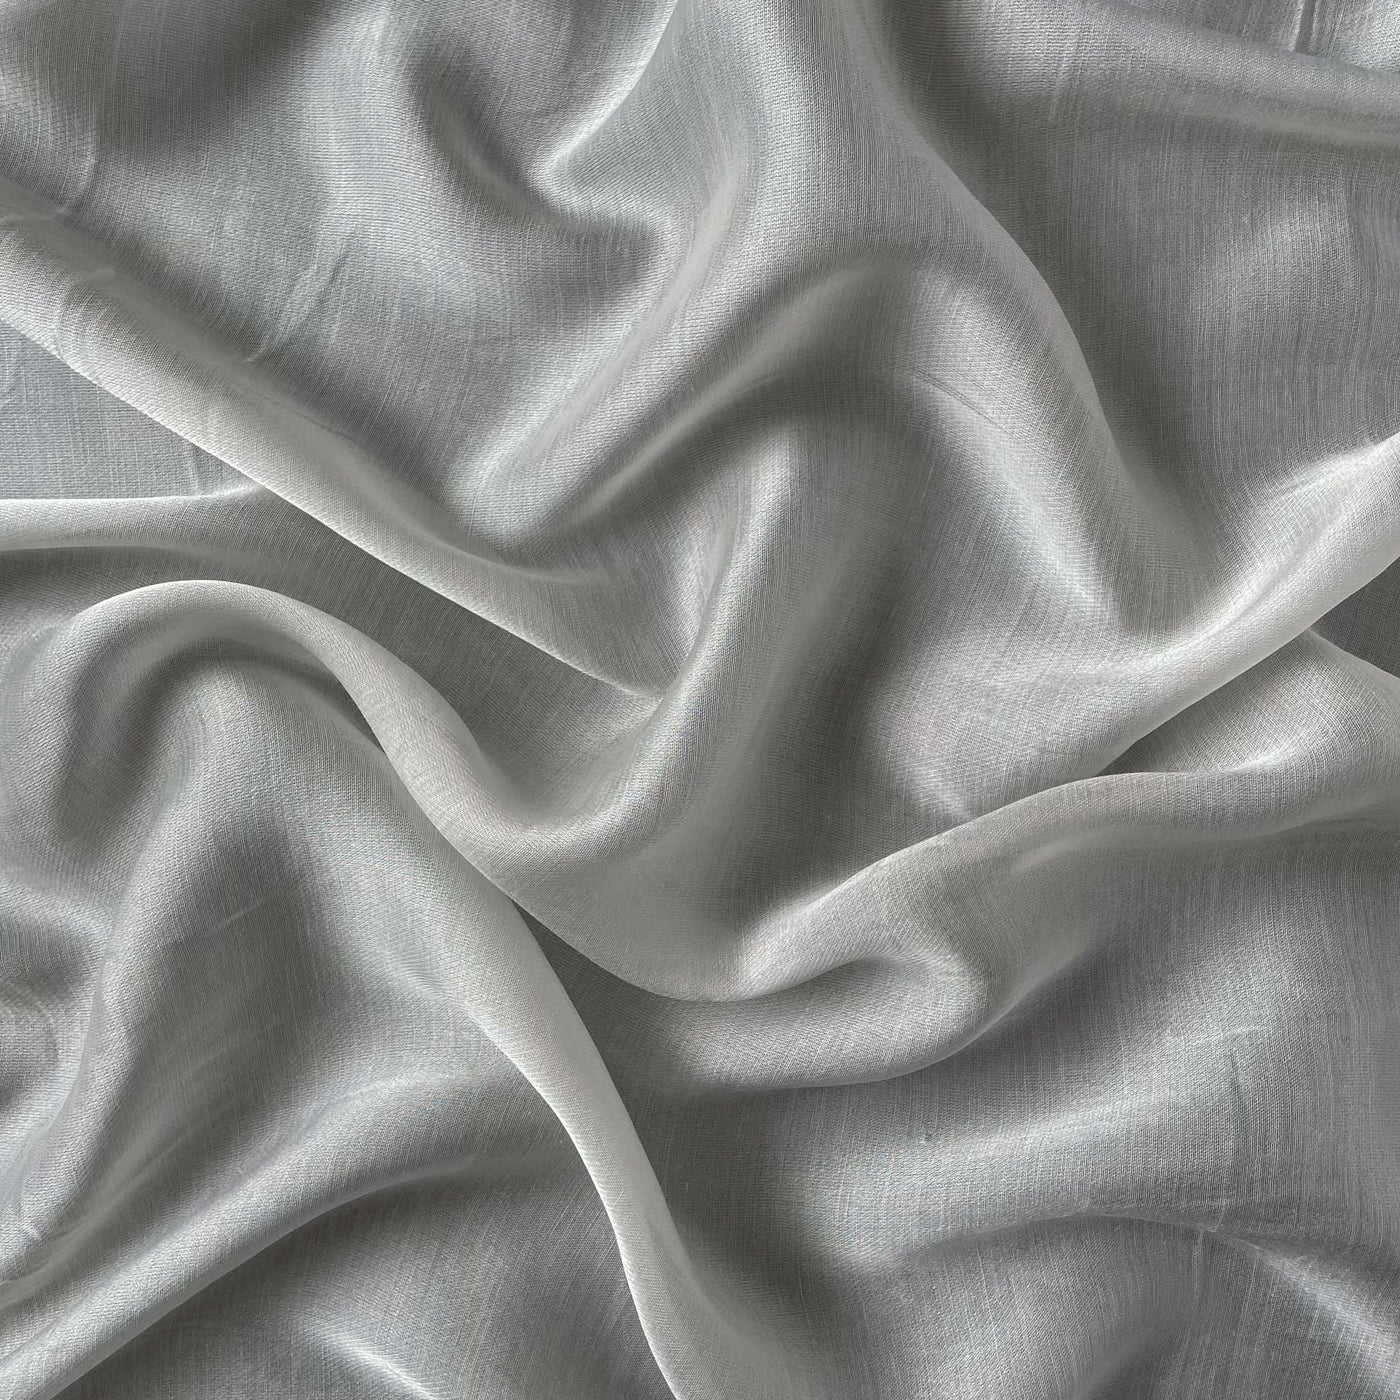 Dyeable Fabric Cut Piece (CUT PIECE) White Dyeable Pure Viscose Organza Satin Plain Fabric (Width 44 Inches)